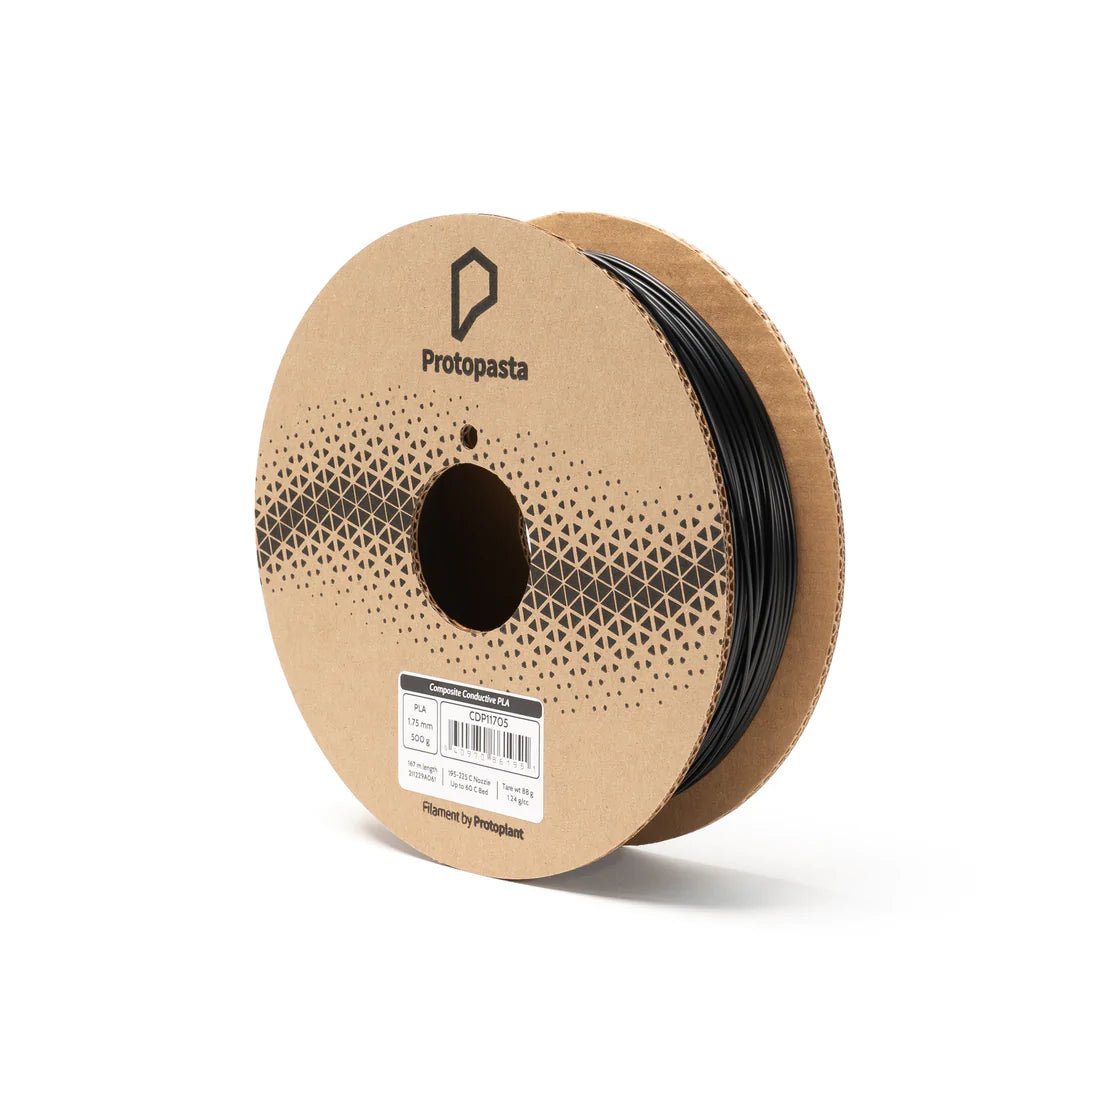 ProtoPasta Electrically Conductive Composite PLA 1.75mm (Cardboard Spools - 500G) - West3D Printing - ProtoPasta